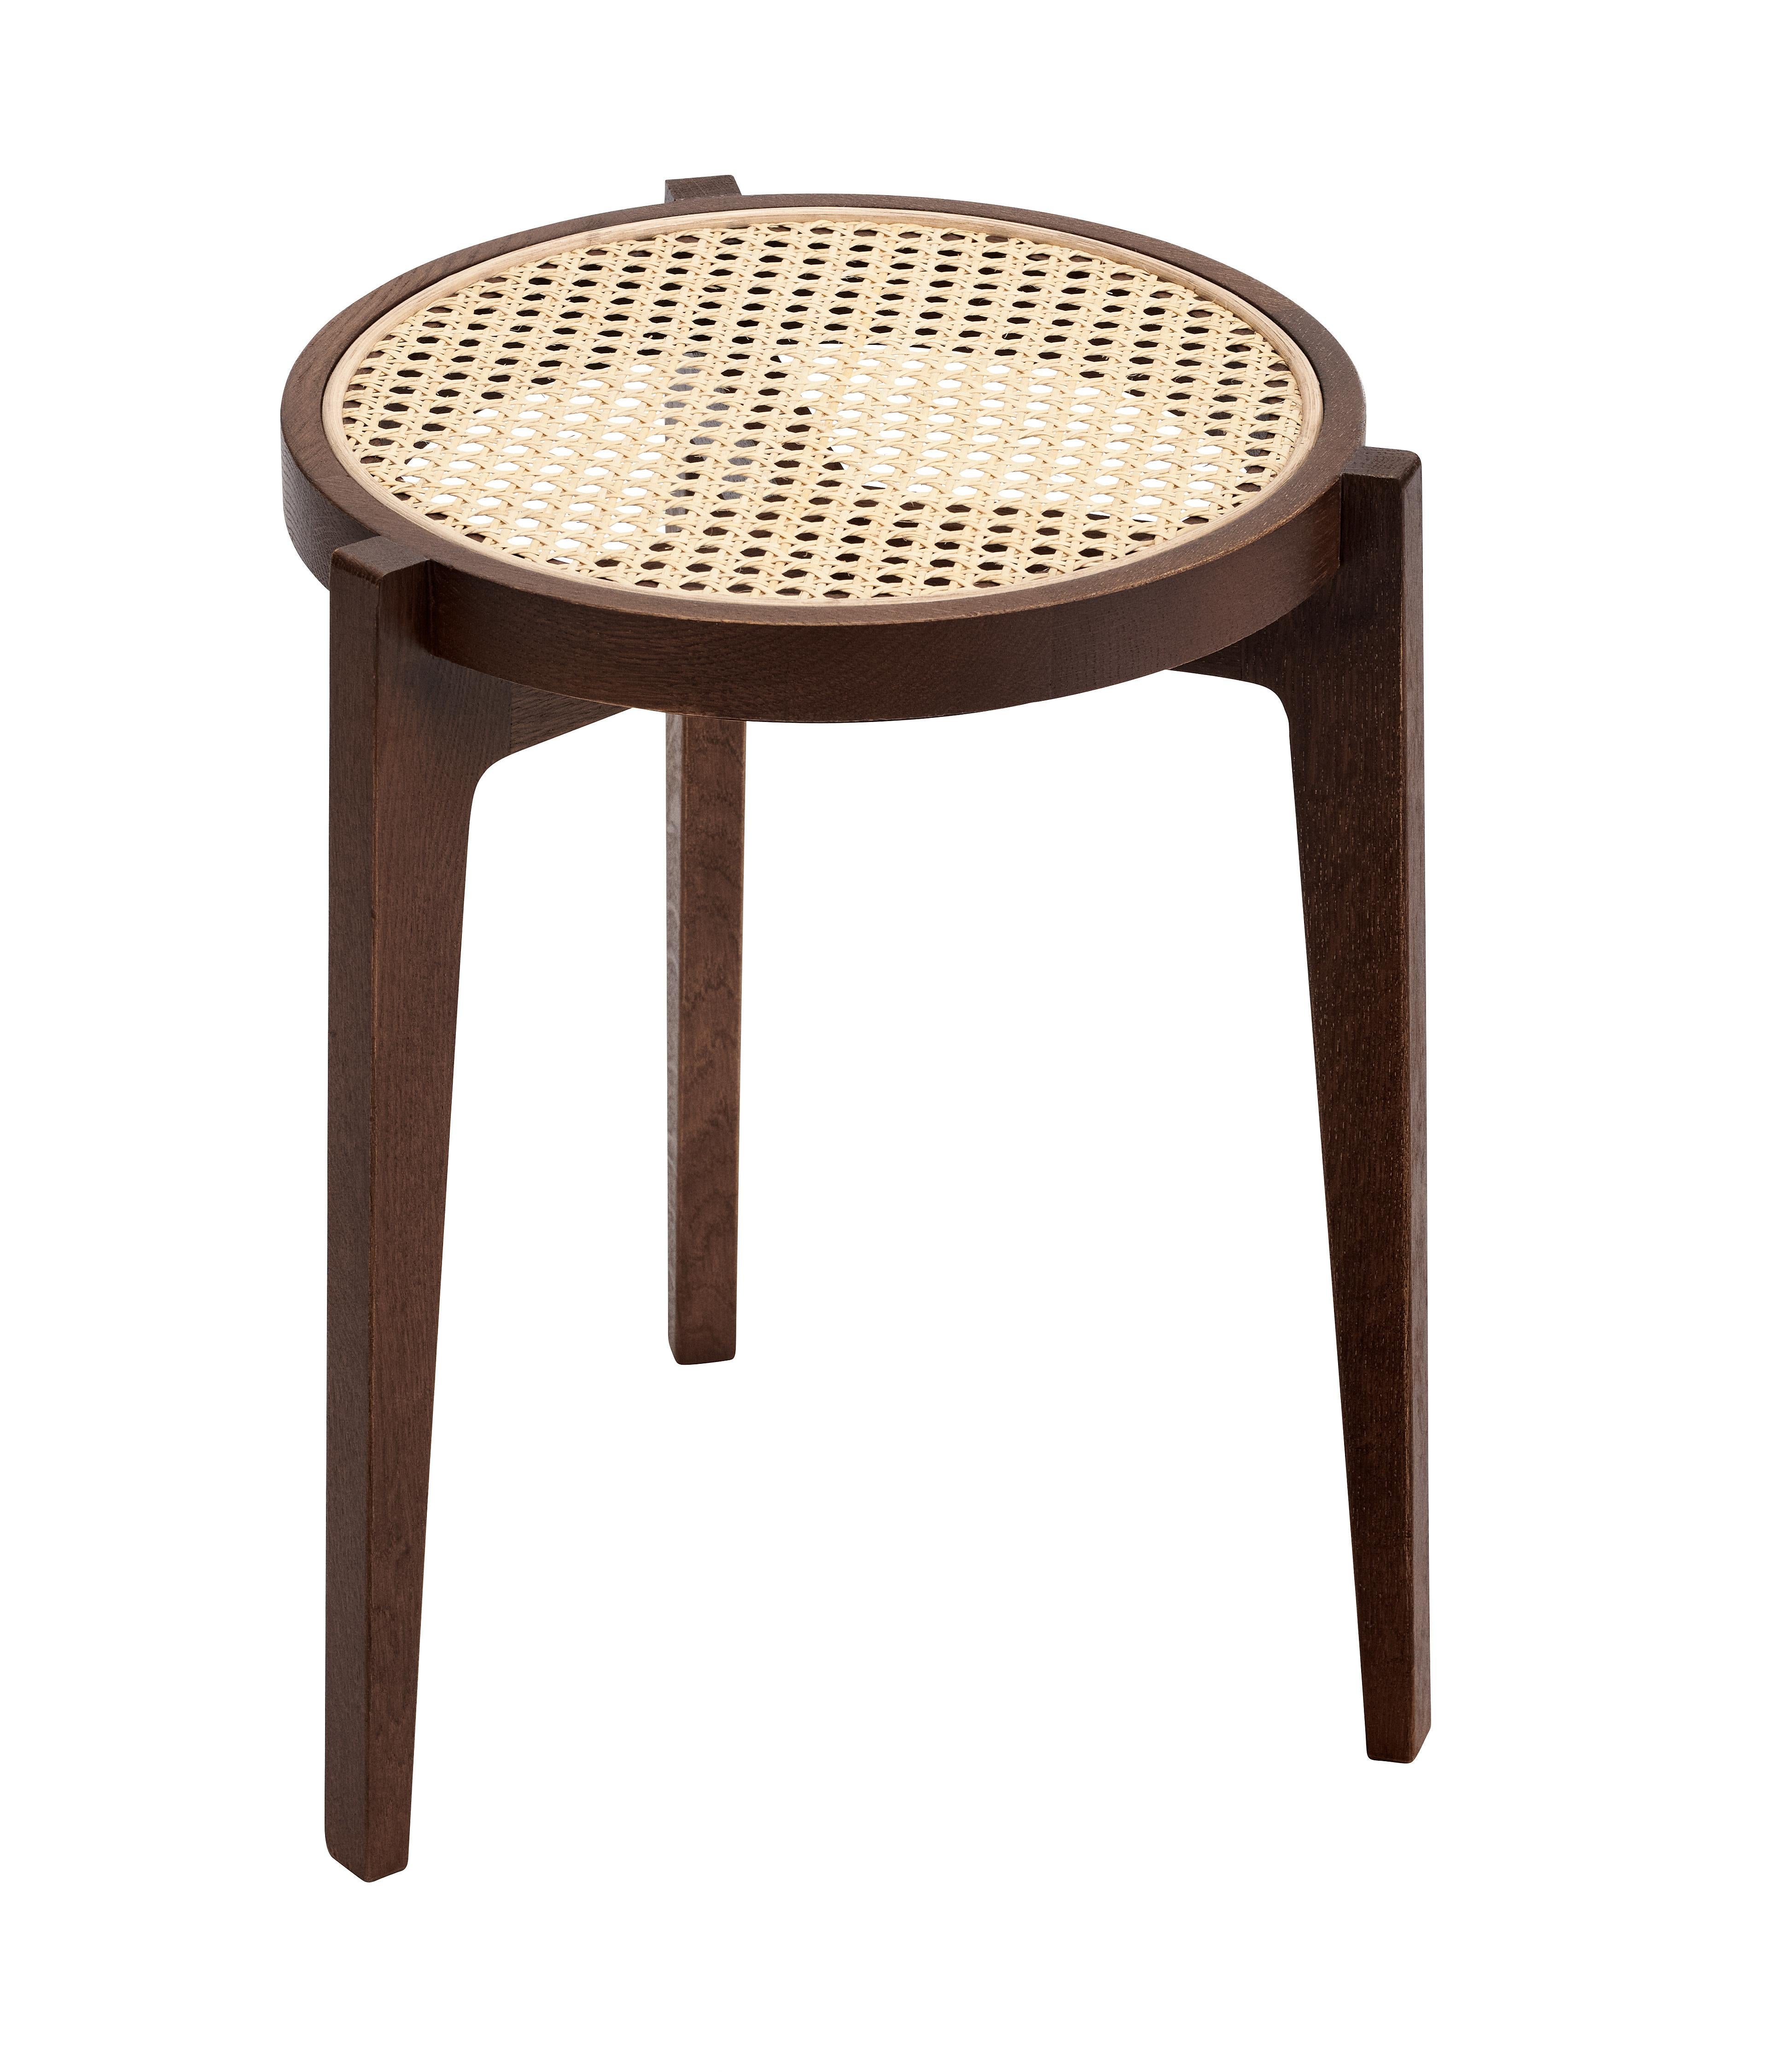 'Le Roi' Stool by Norr11

Dimensions :
Diameter: 36 cm
Height: 44 cm

Model shown on the picture:
Color: Dark Smoked Oak
Natural French Rattan

---
The Le Roi Coffee Table is constructed as a frame geometry of solid oak, with
inlaid natural French